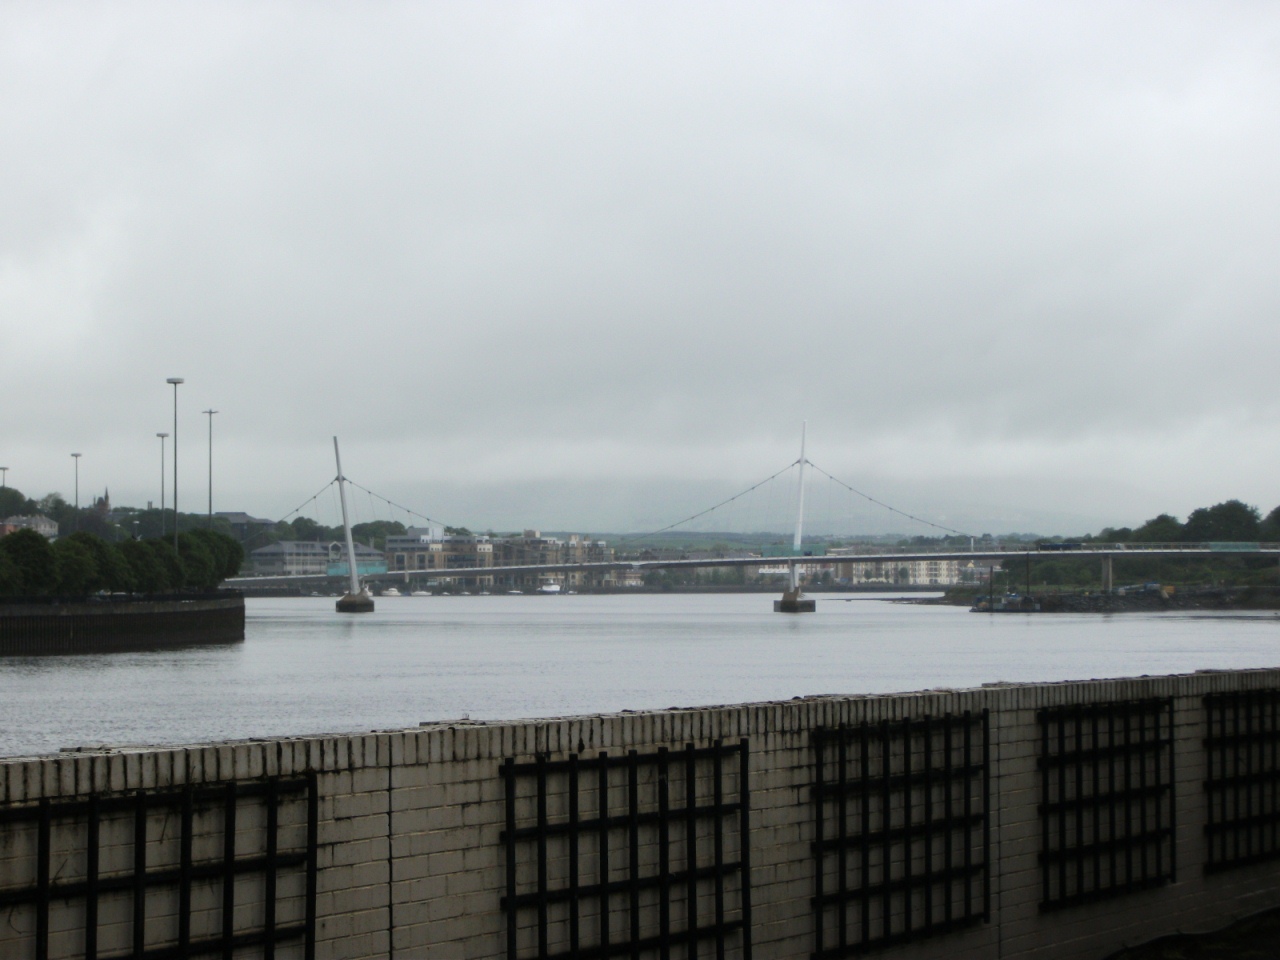 #2: The City of Londonderry, as seen from Waterside station across the river.